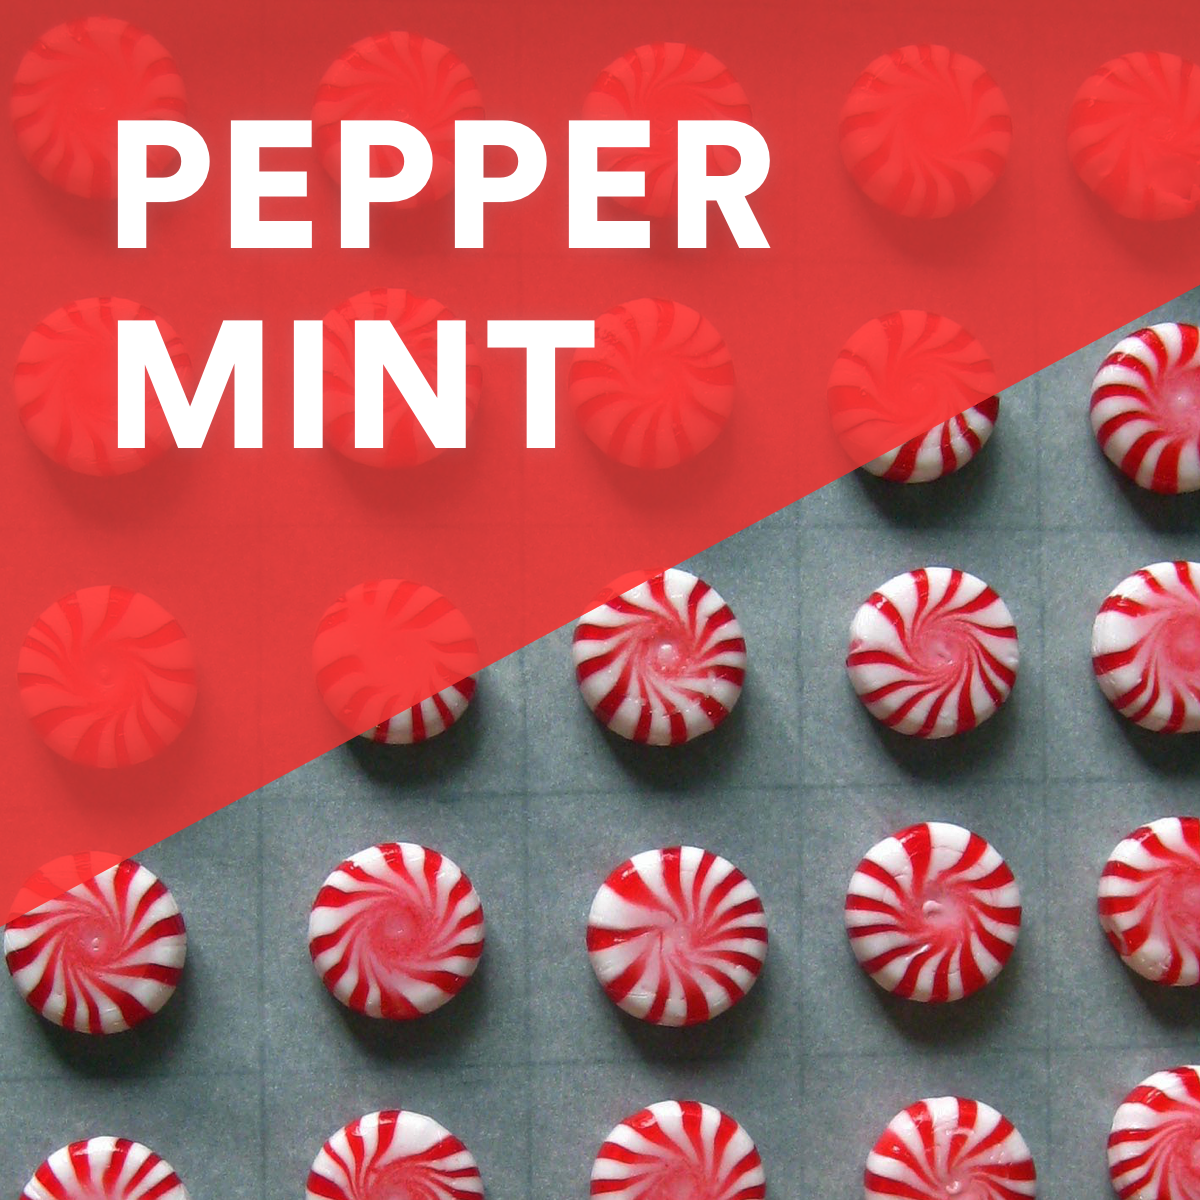 peppermint photo.png